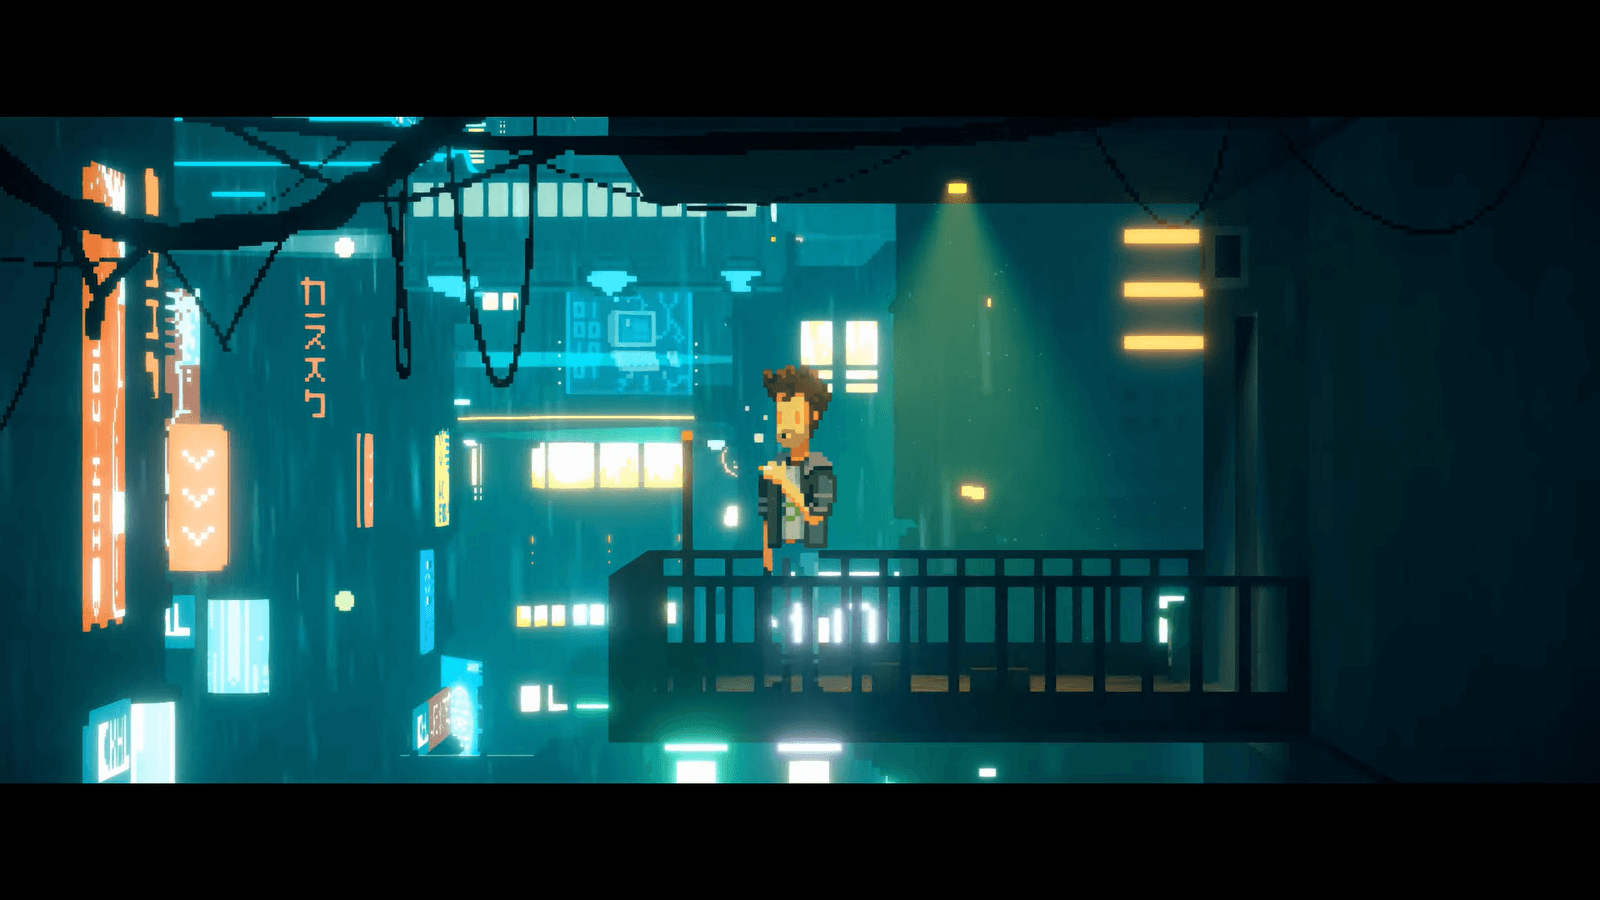 A futuristic night city scape features in the background. On a balcony in the foreground is a person smoking a cigarette